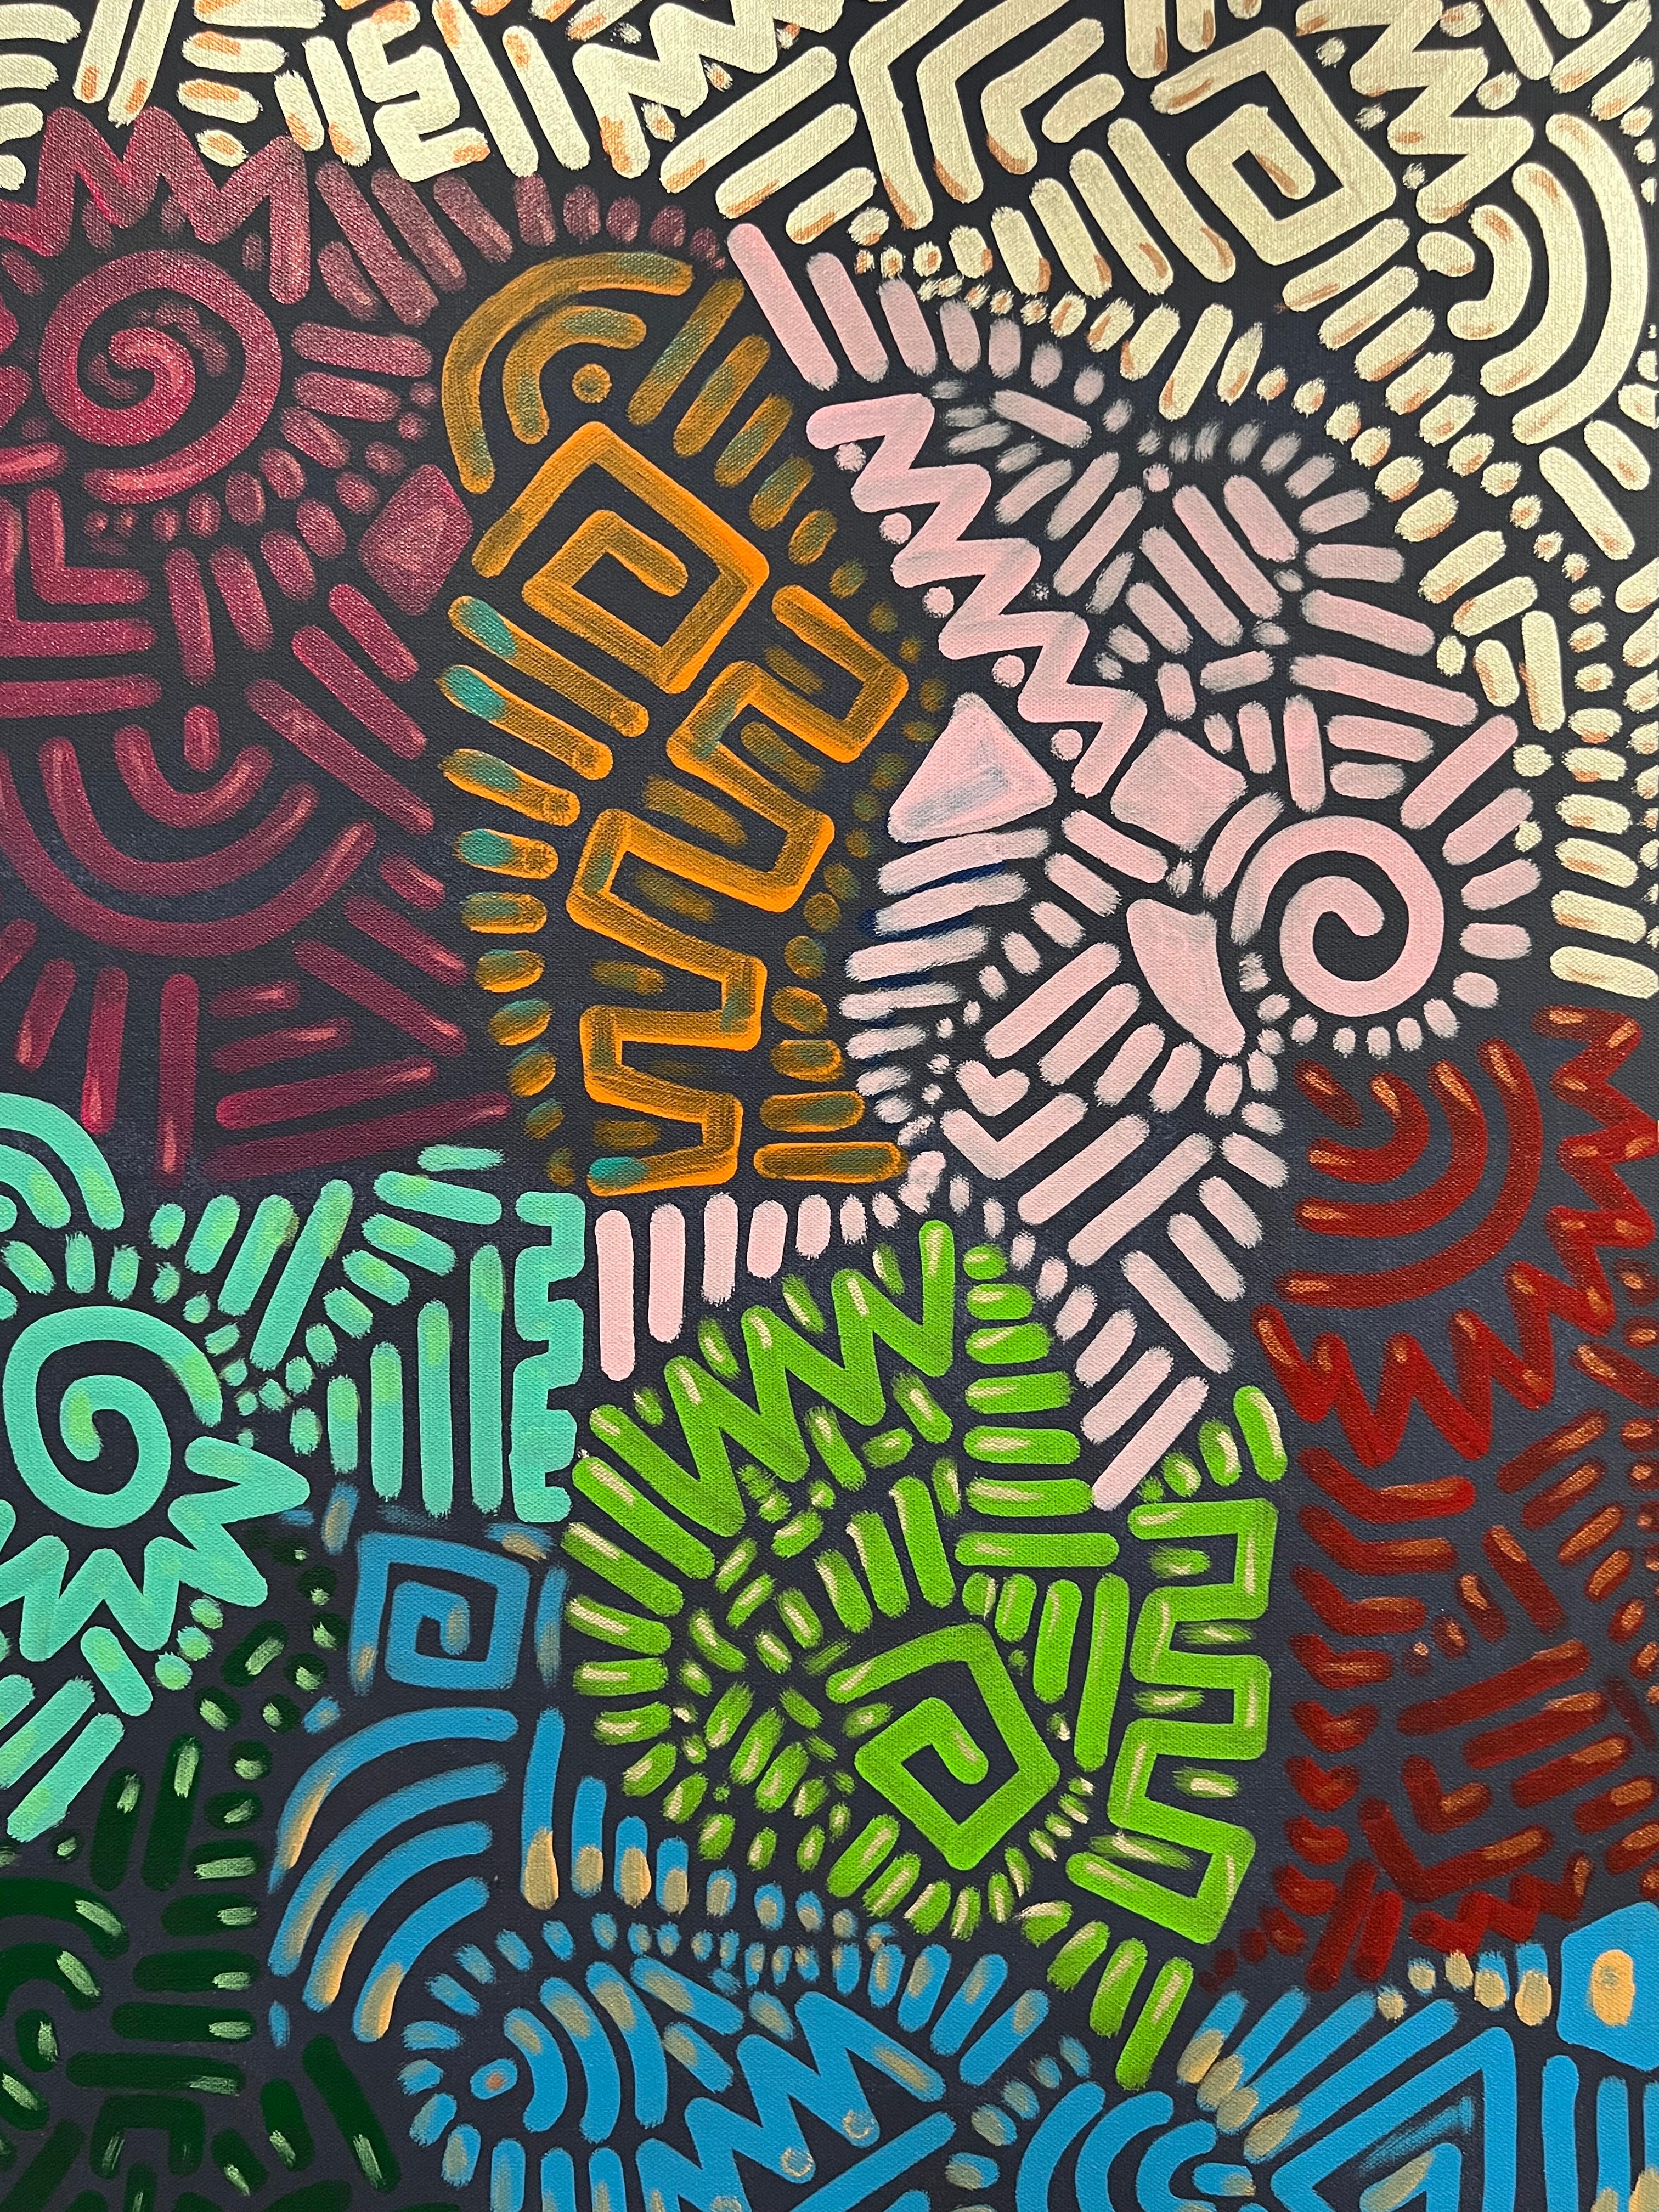 Contemporary Color Swirls, Keith Haring inspired unique Abstract Painting - Abstract Geometric Mixed Media Art by Avi Ash